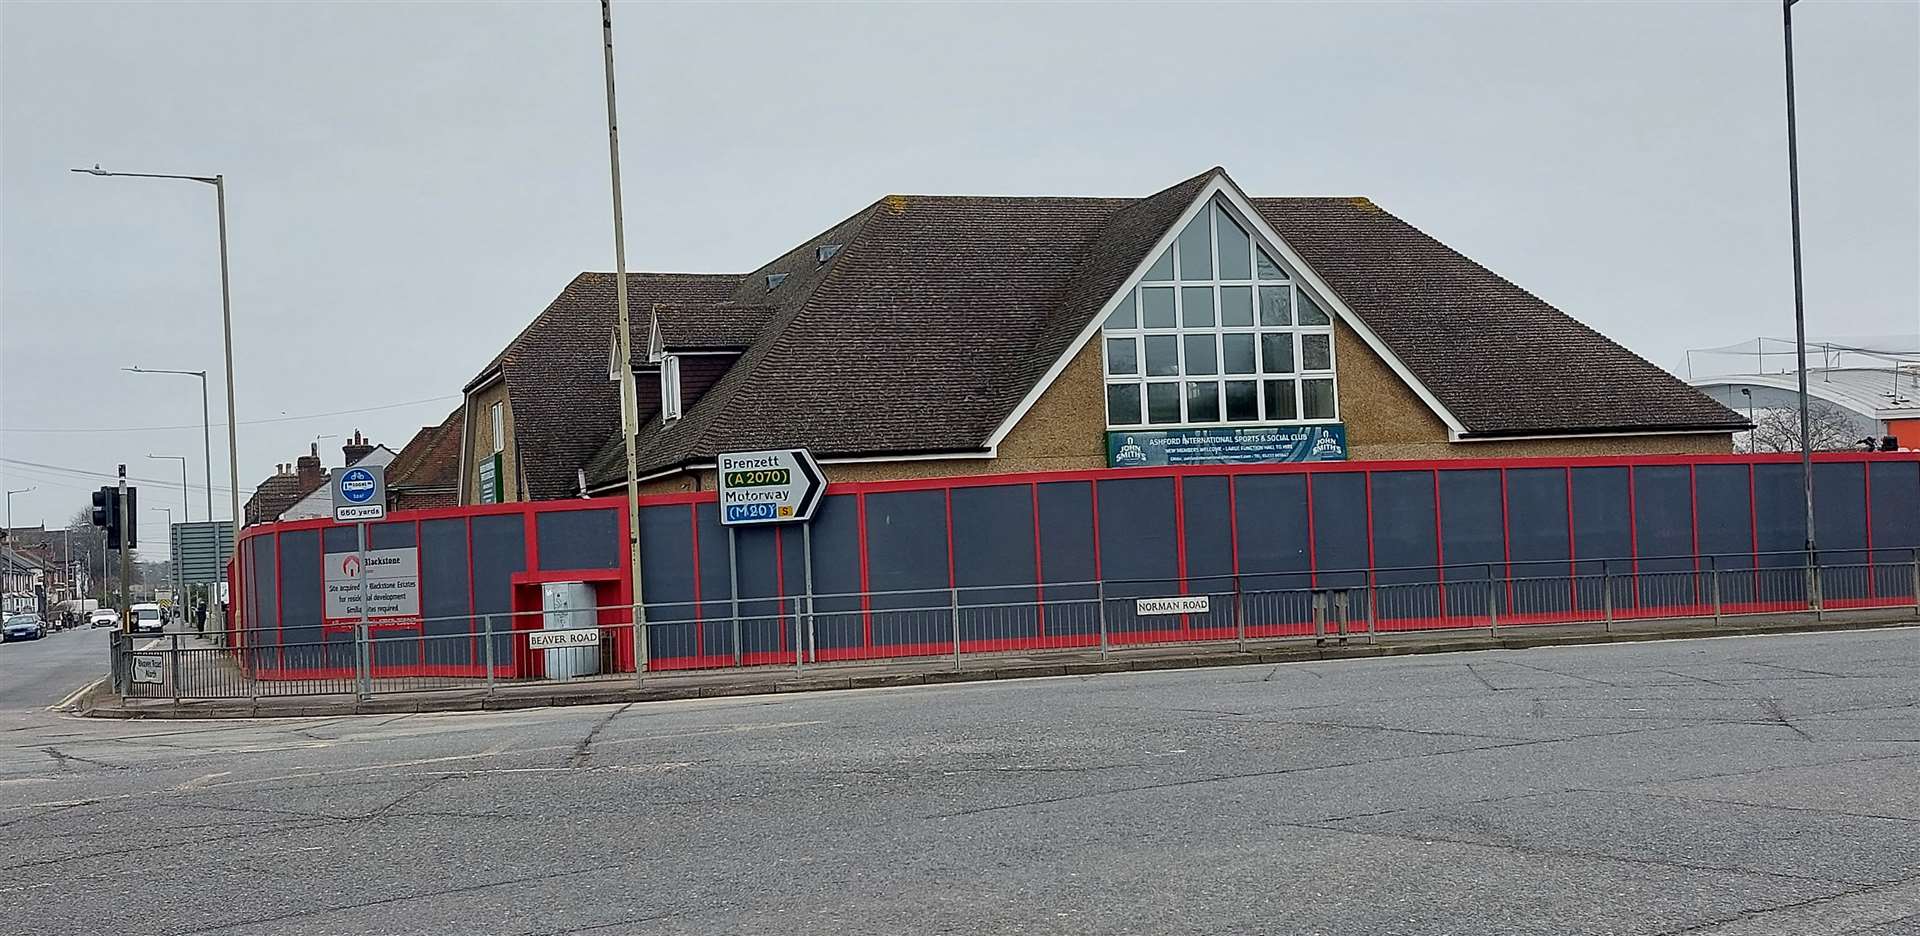 A demolition notice to knock down the building in Beaver Road has been approved